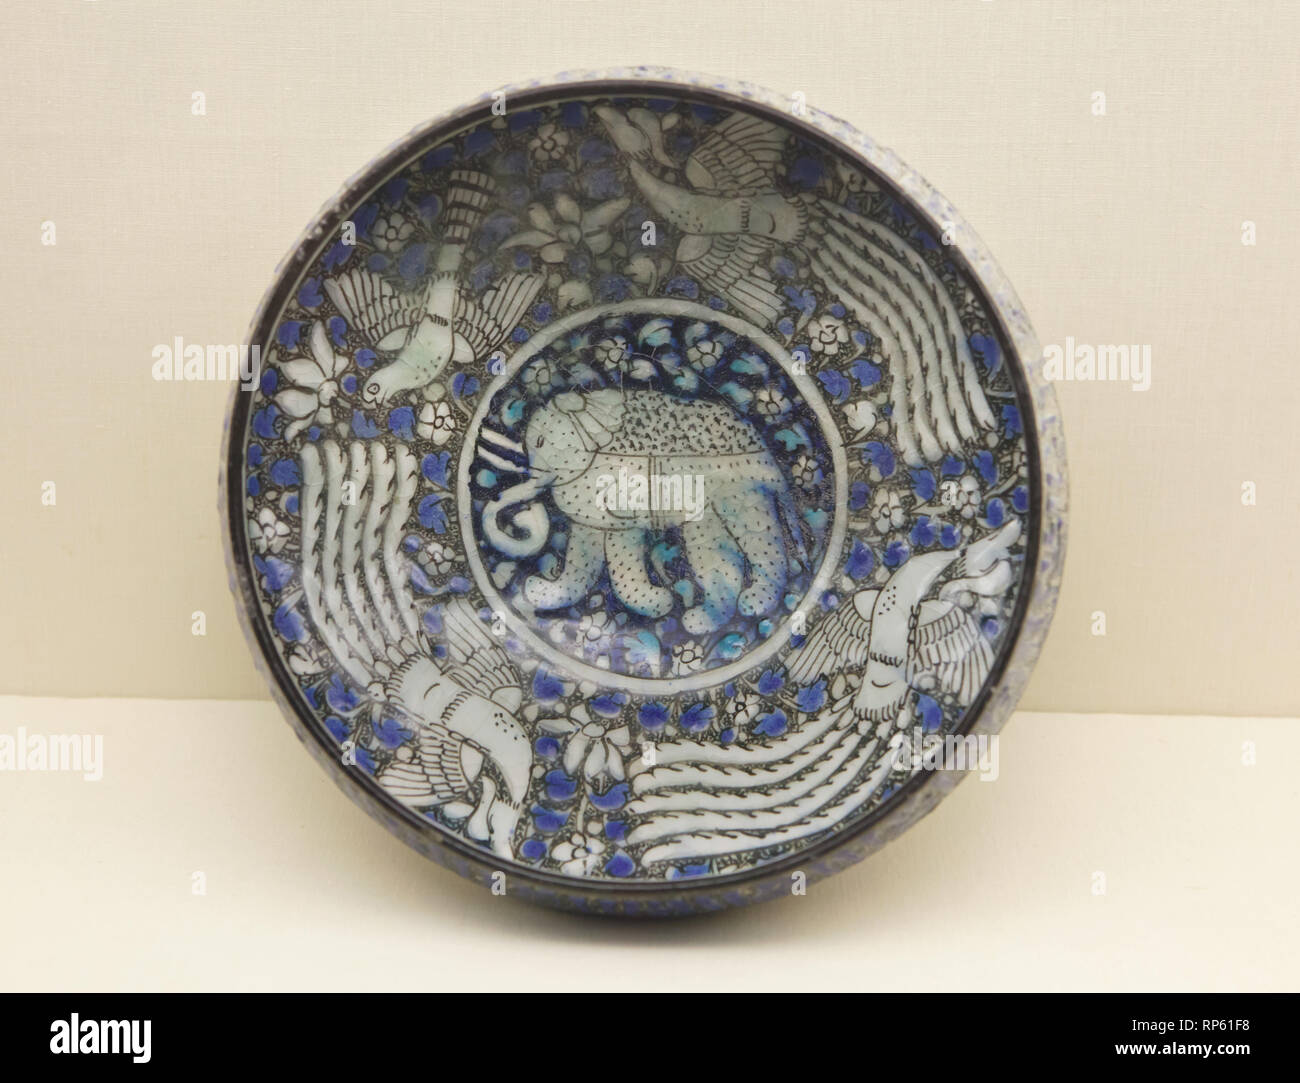 Iranian fritware (stone-paste) bowl with an elephant and three phoenixes painted under the glaze in Sultanabad style (probably from Kashan, Iran) dated from the 14th century on display in the Calouste Gulbenkian Museum (Museu Calouste Gulbenkian) in Lisbon, Portugal. Stock Photo